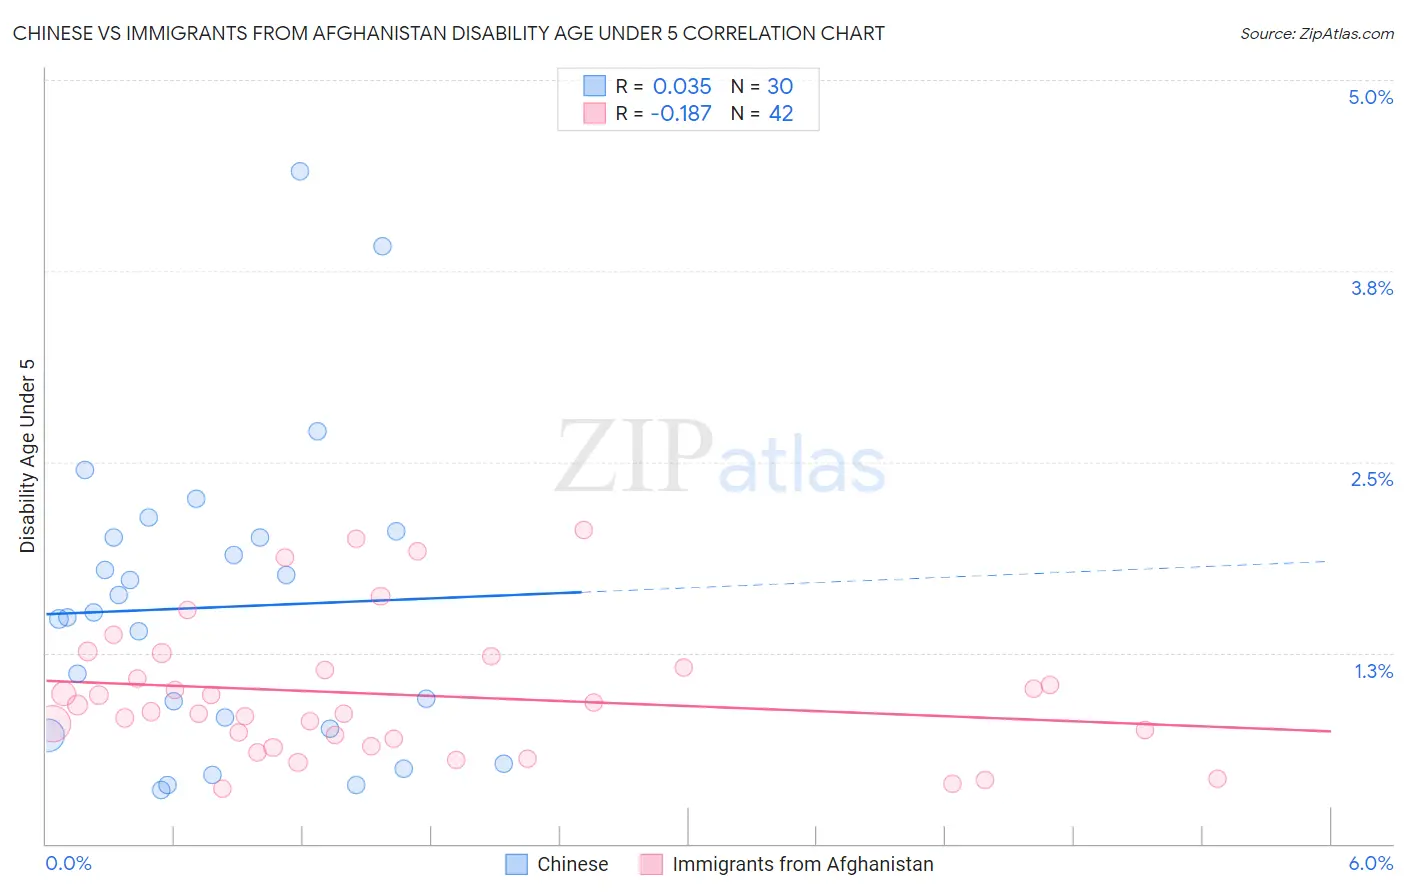 Chinese vs Immigrants from Afghanistan Disability Age Under 5